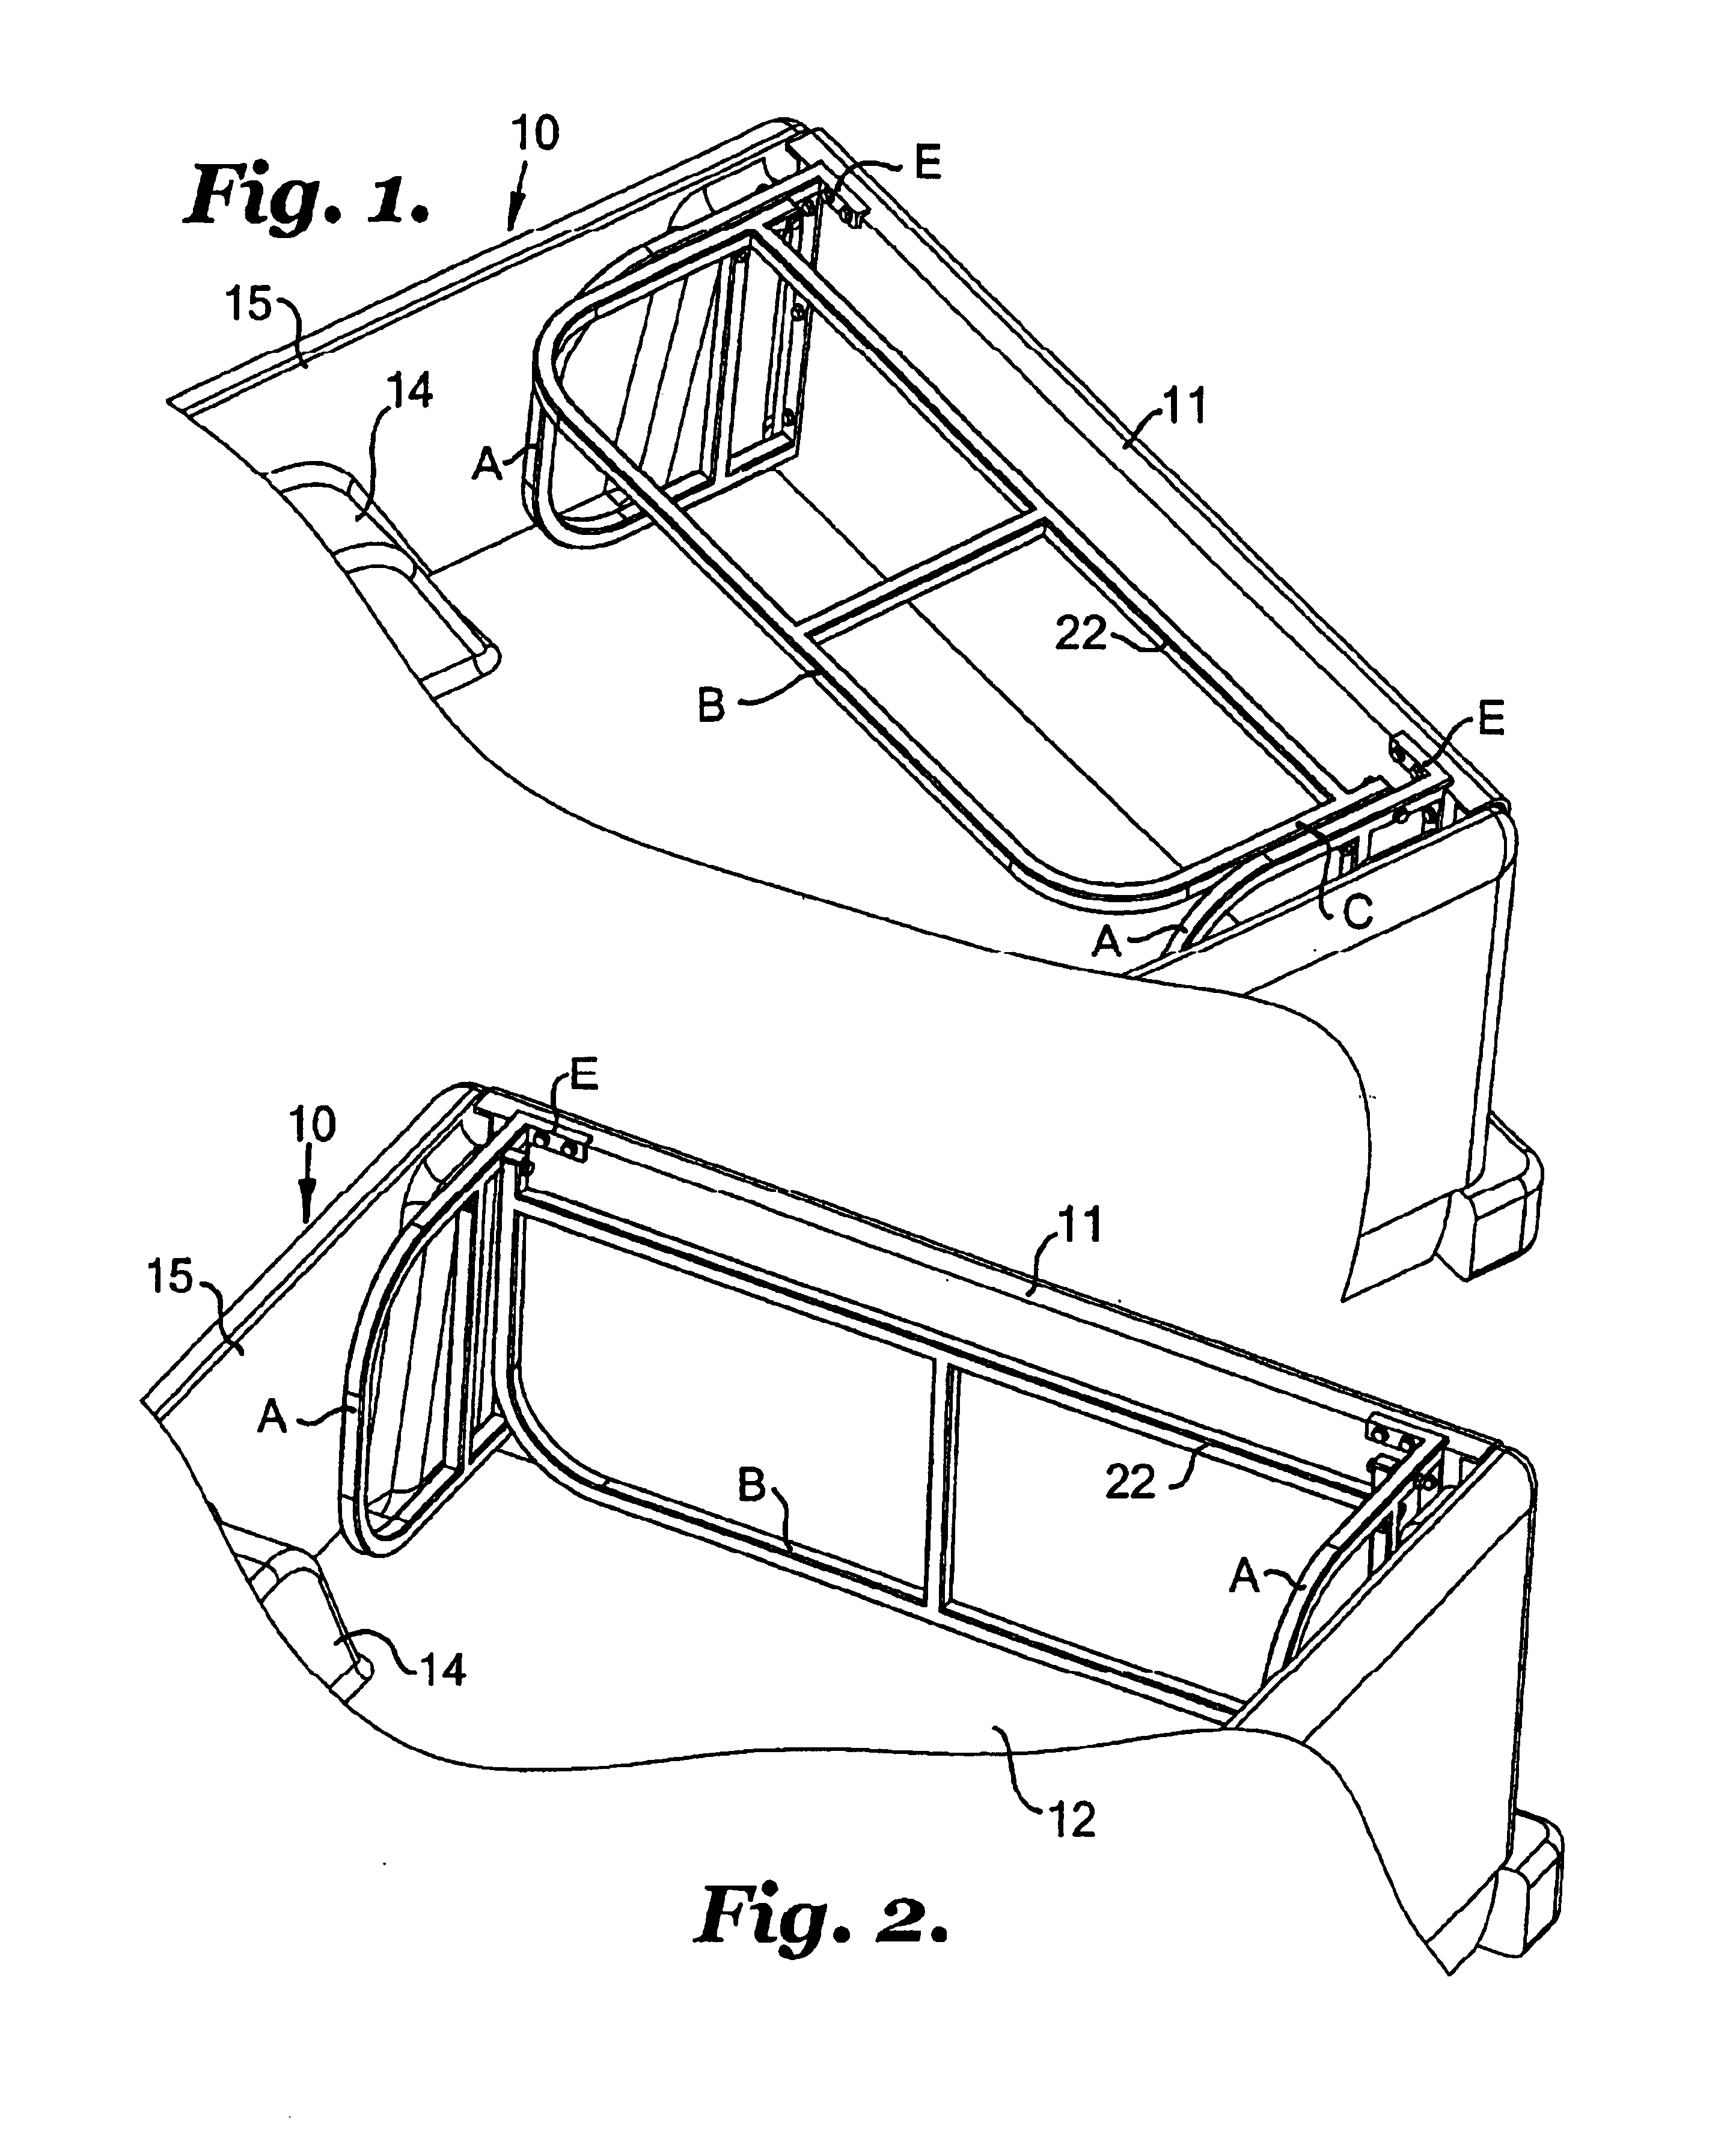 Apparatus and method for accessing and extending a truck bed